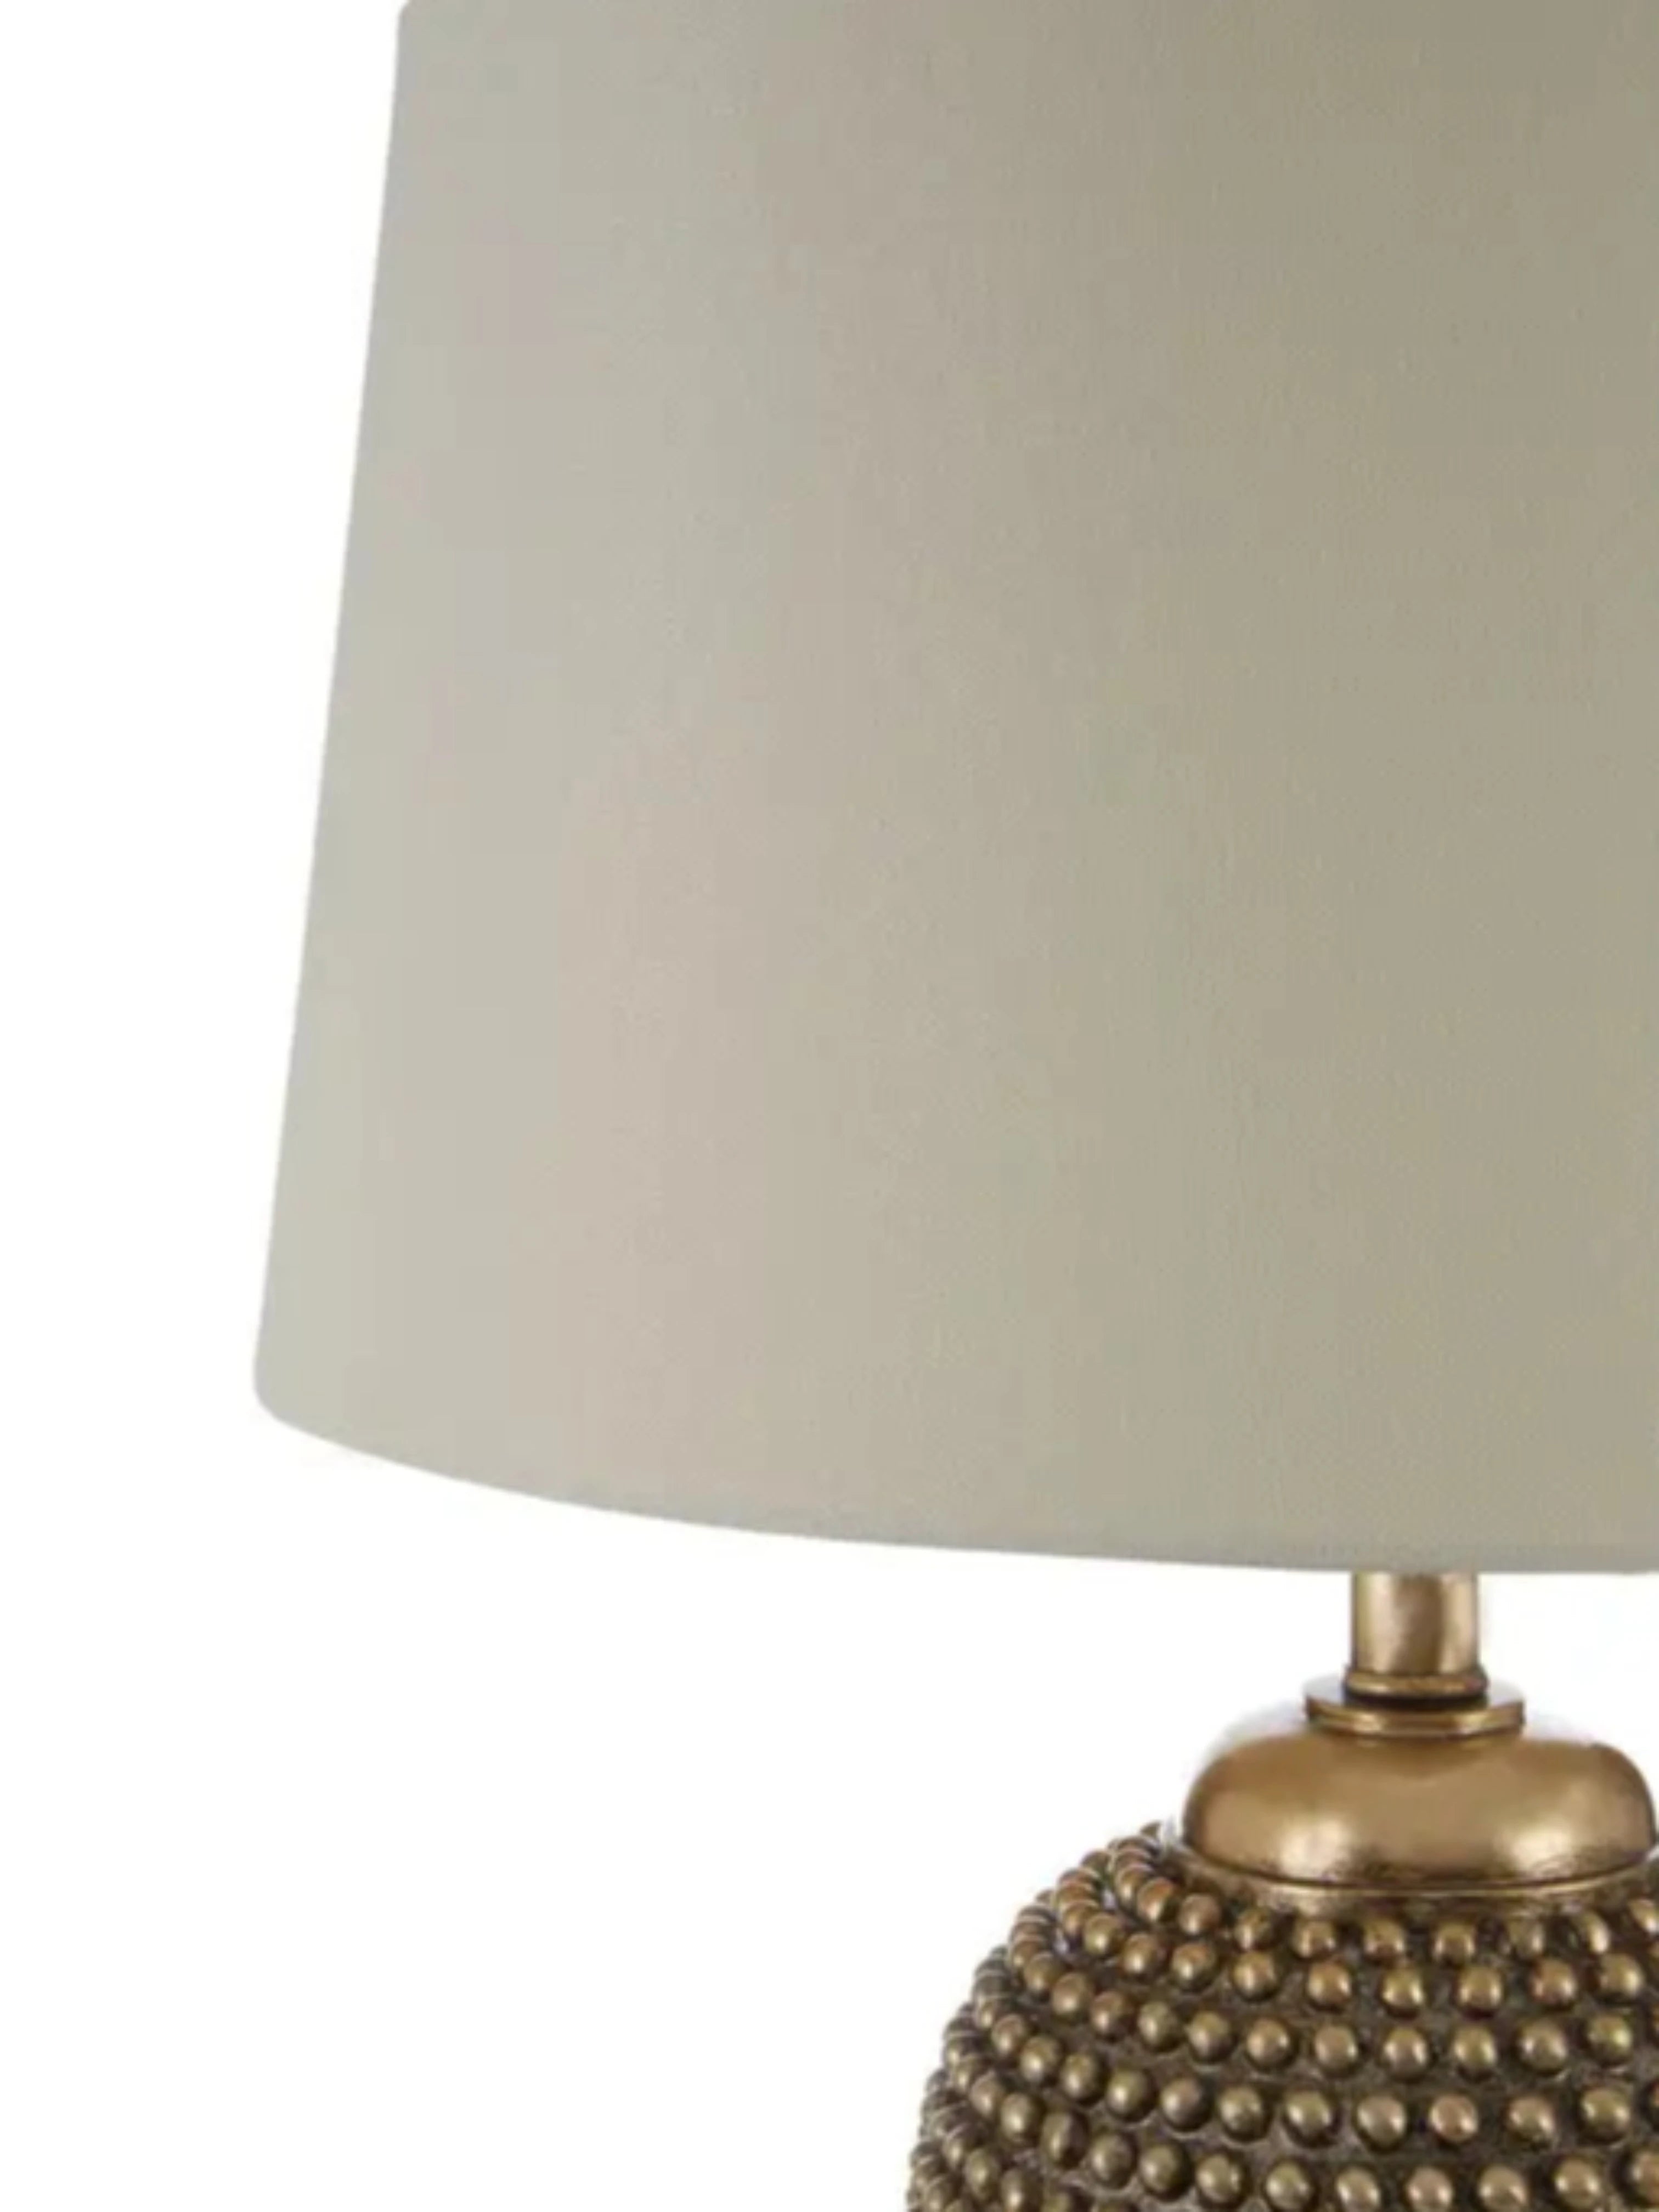 Gold Textured Ball Lamp with White Shade